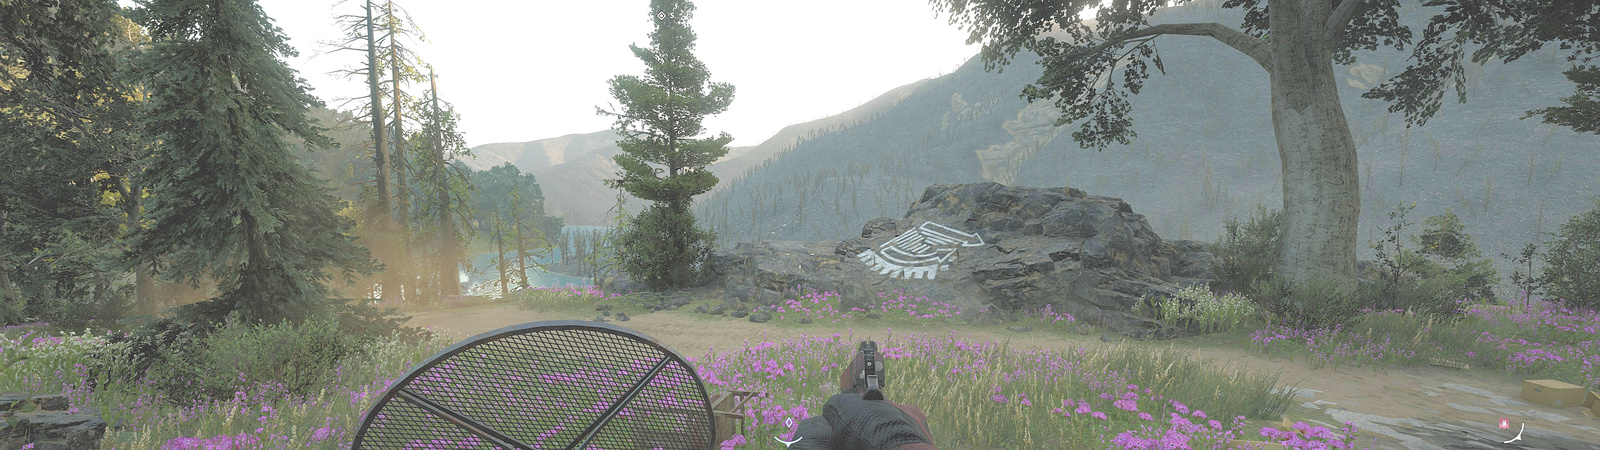 First person handgun drawn down with an overturned table, pink flowers and a line painting on a rock with river valley in background